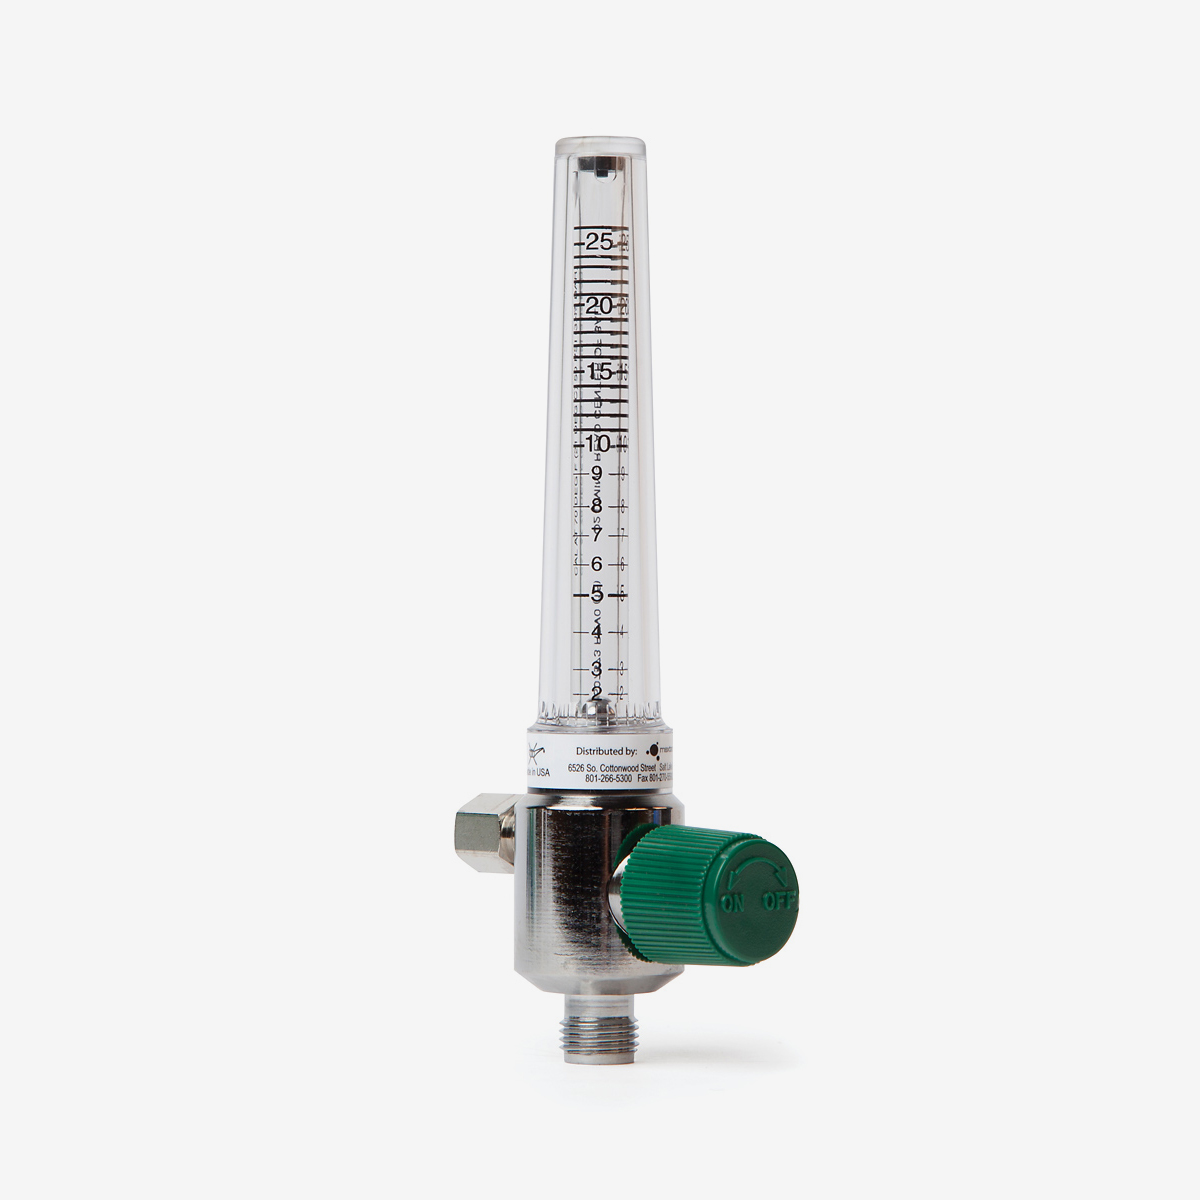 Angled view of 2-26 lpm flow meter with green knob